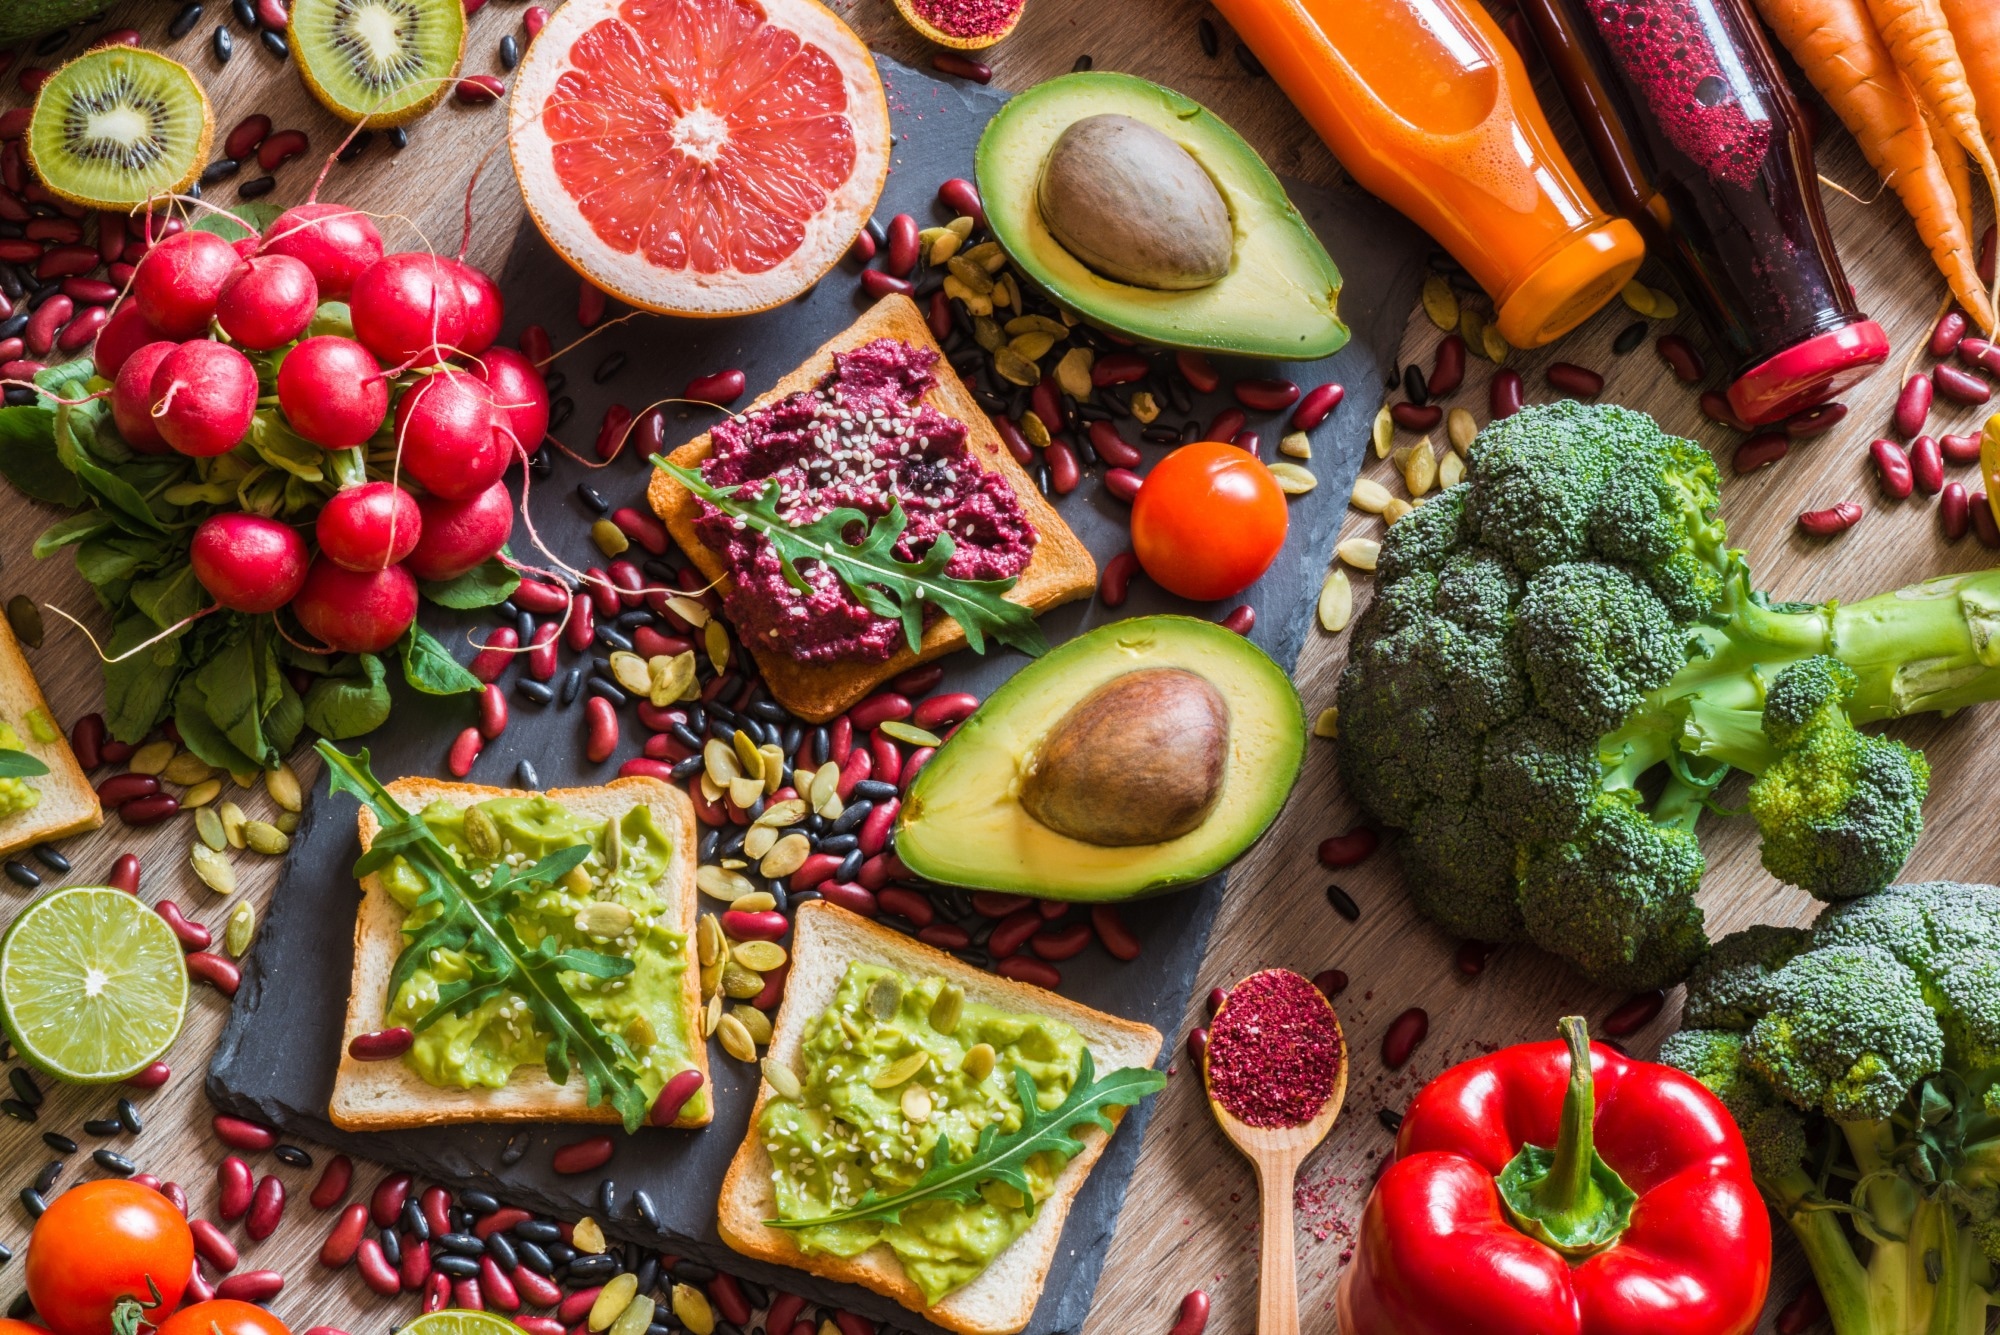 Study: Sustainable healthy diet modeling for a plant-based dietary transitioning in the United States. Image Credit: RONEDYA/Shutterstock.com